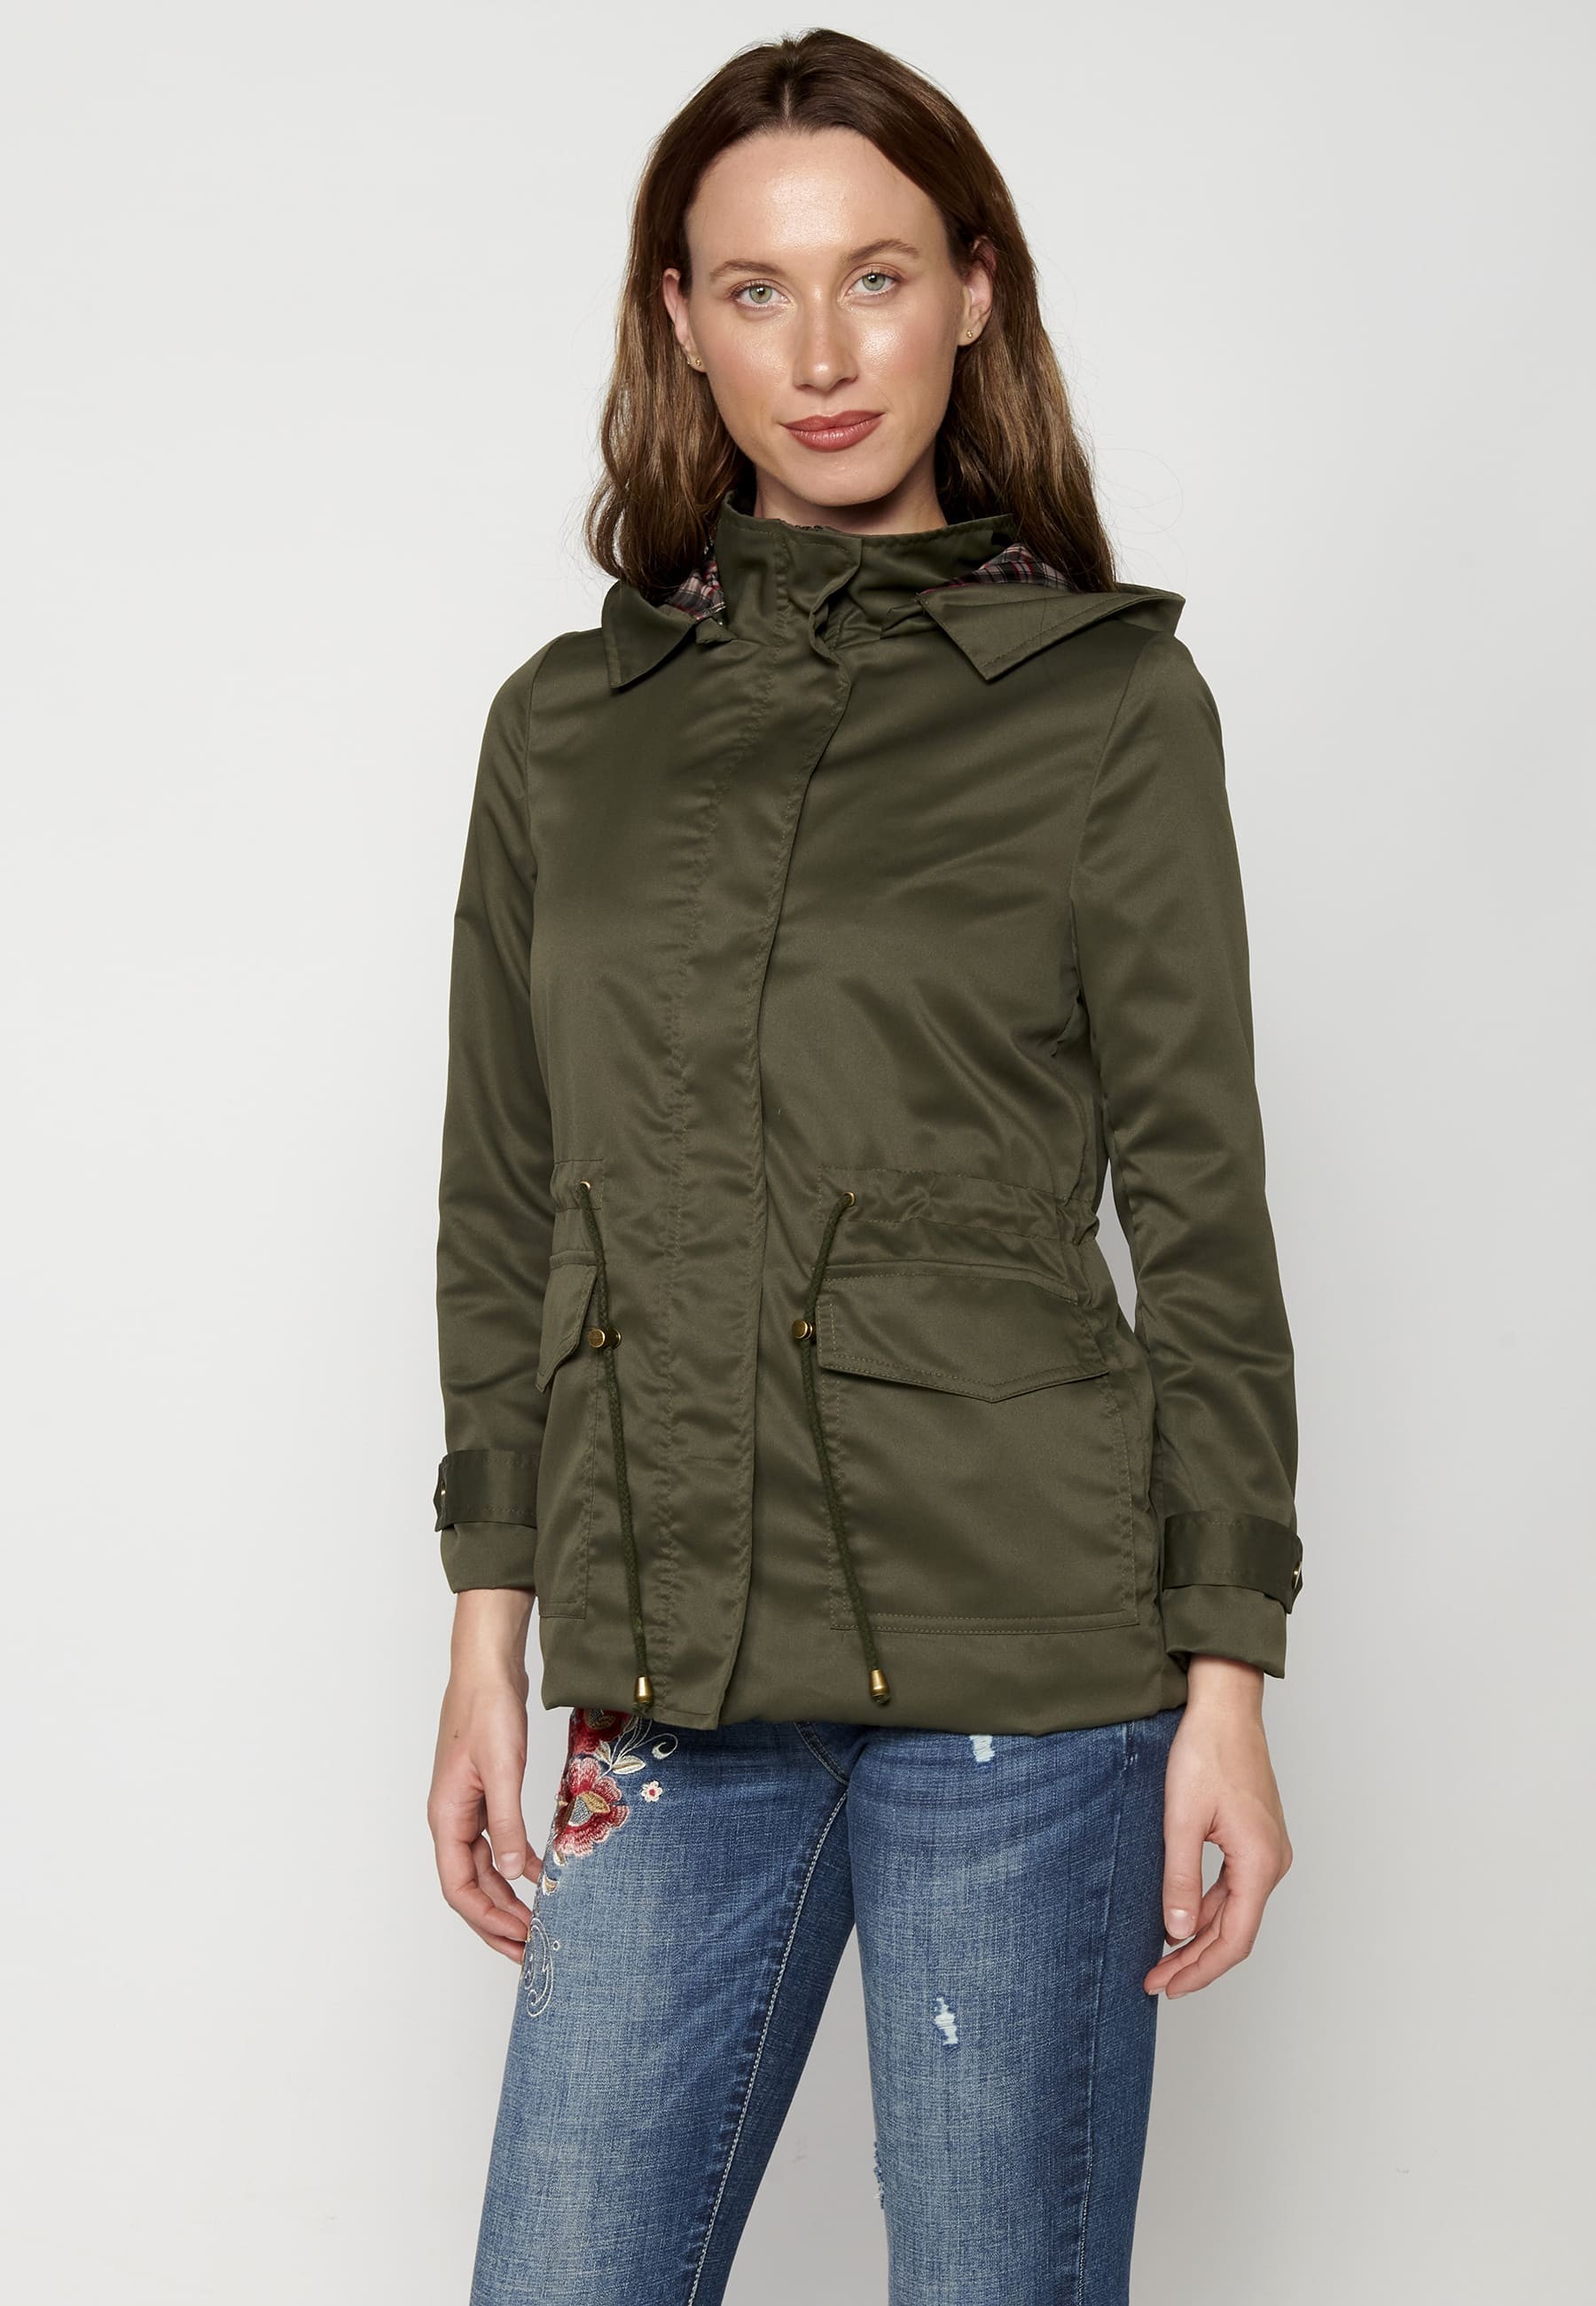 Short Parka Jacket with Hood for Women